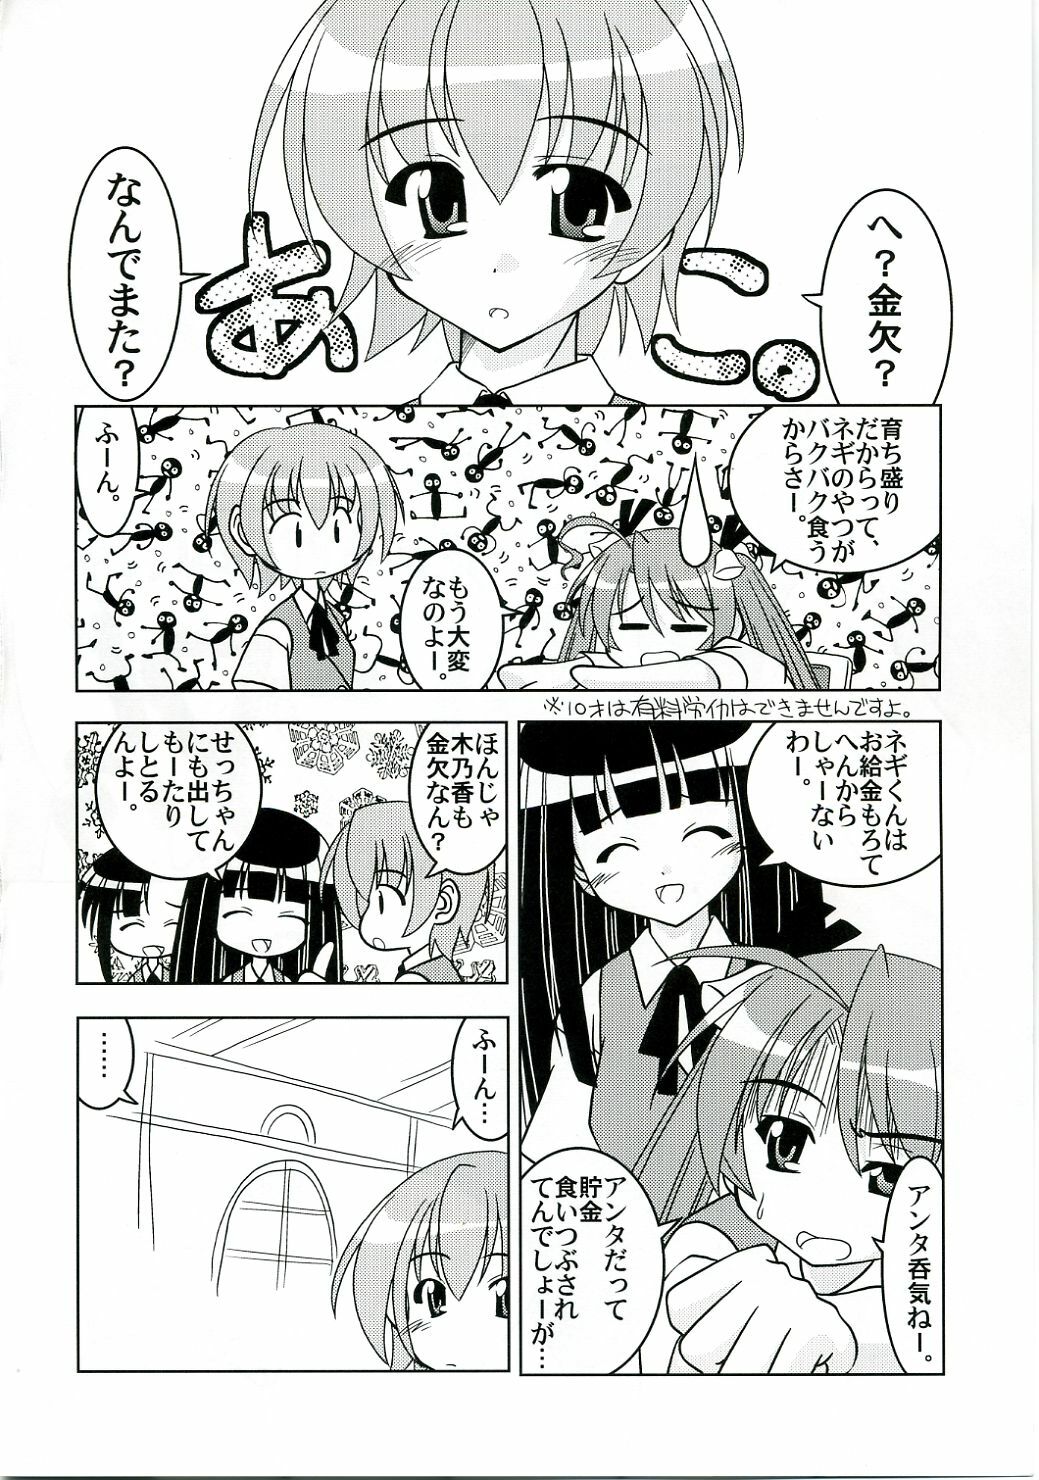 [Nearly Equal ZERO] Lovelys in the School with Dream! 3 (Negima! Magister Negi Magi) page 3 full